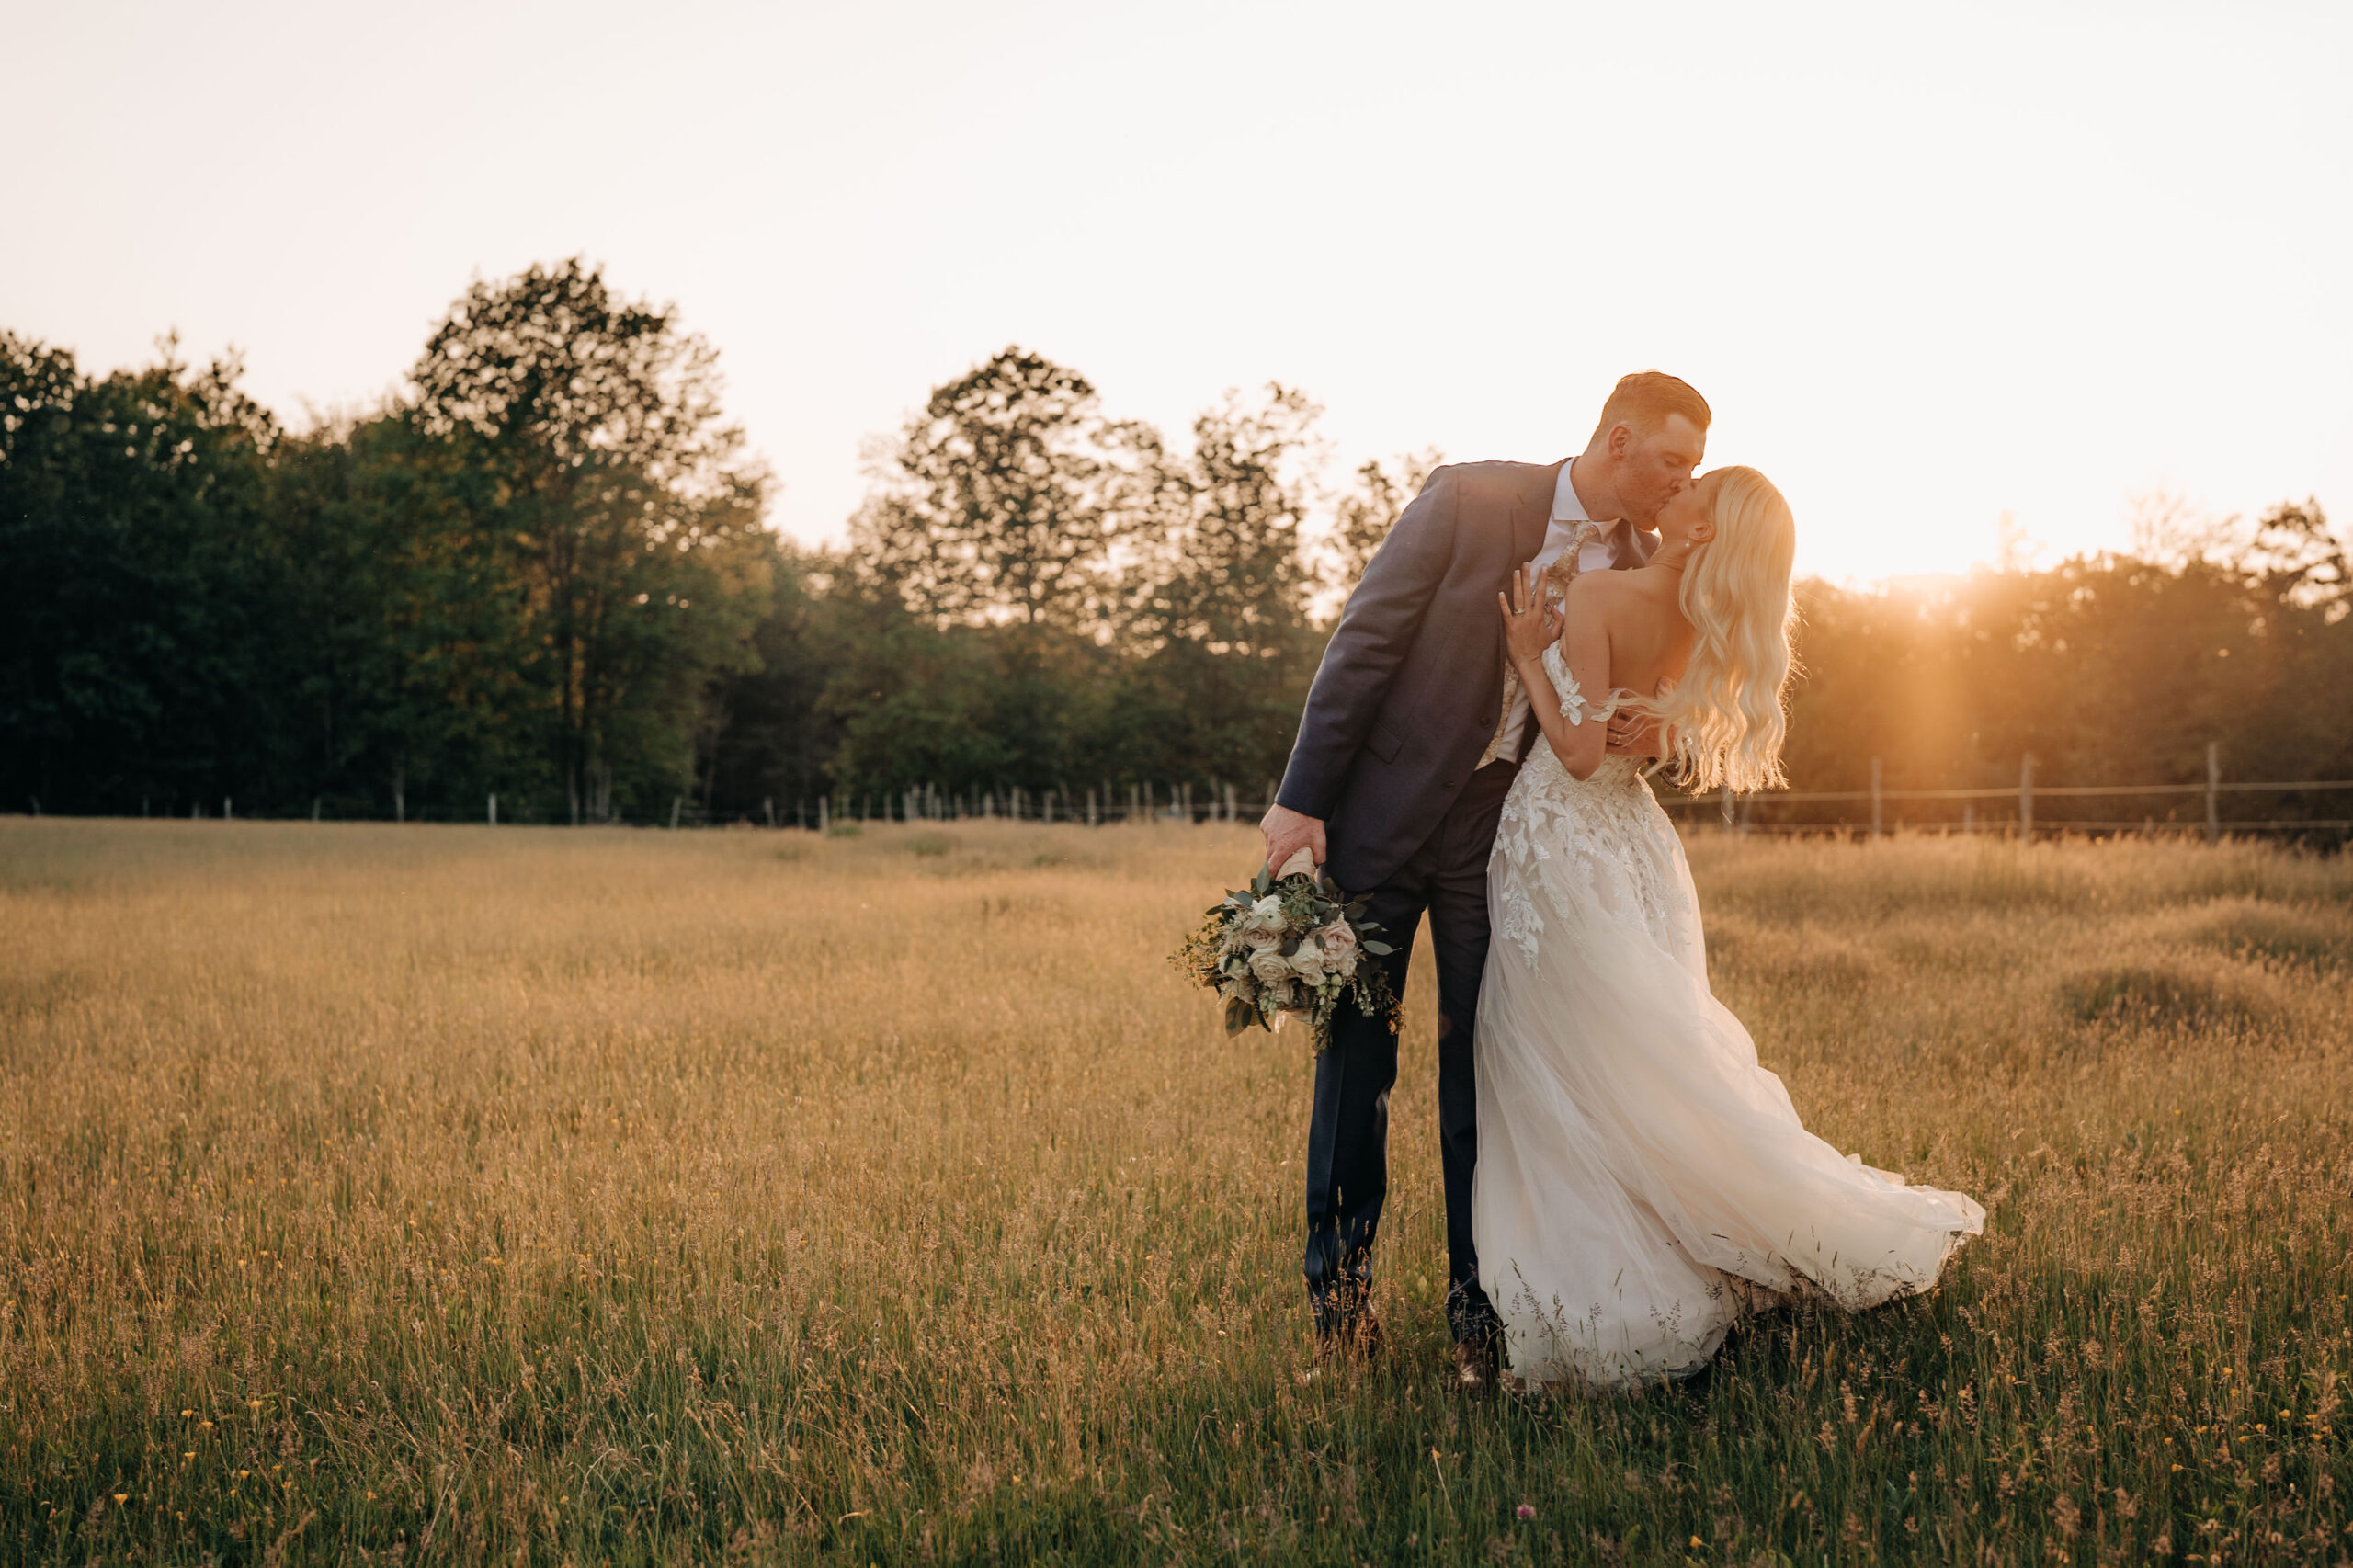 TheWildBunch Photography Valley View Farm Haydenville MA Summer Wedding